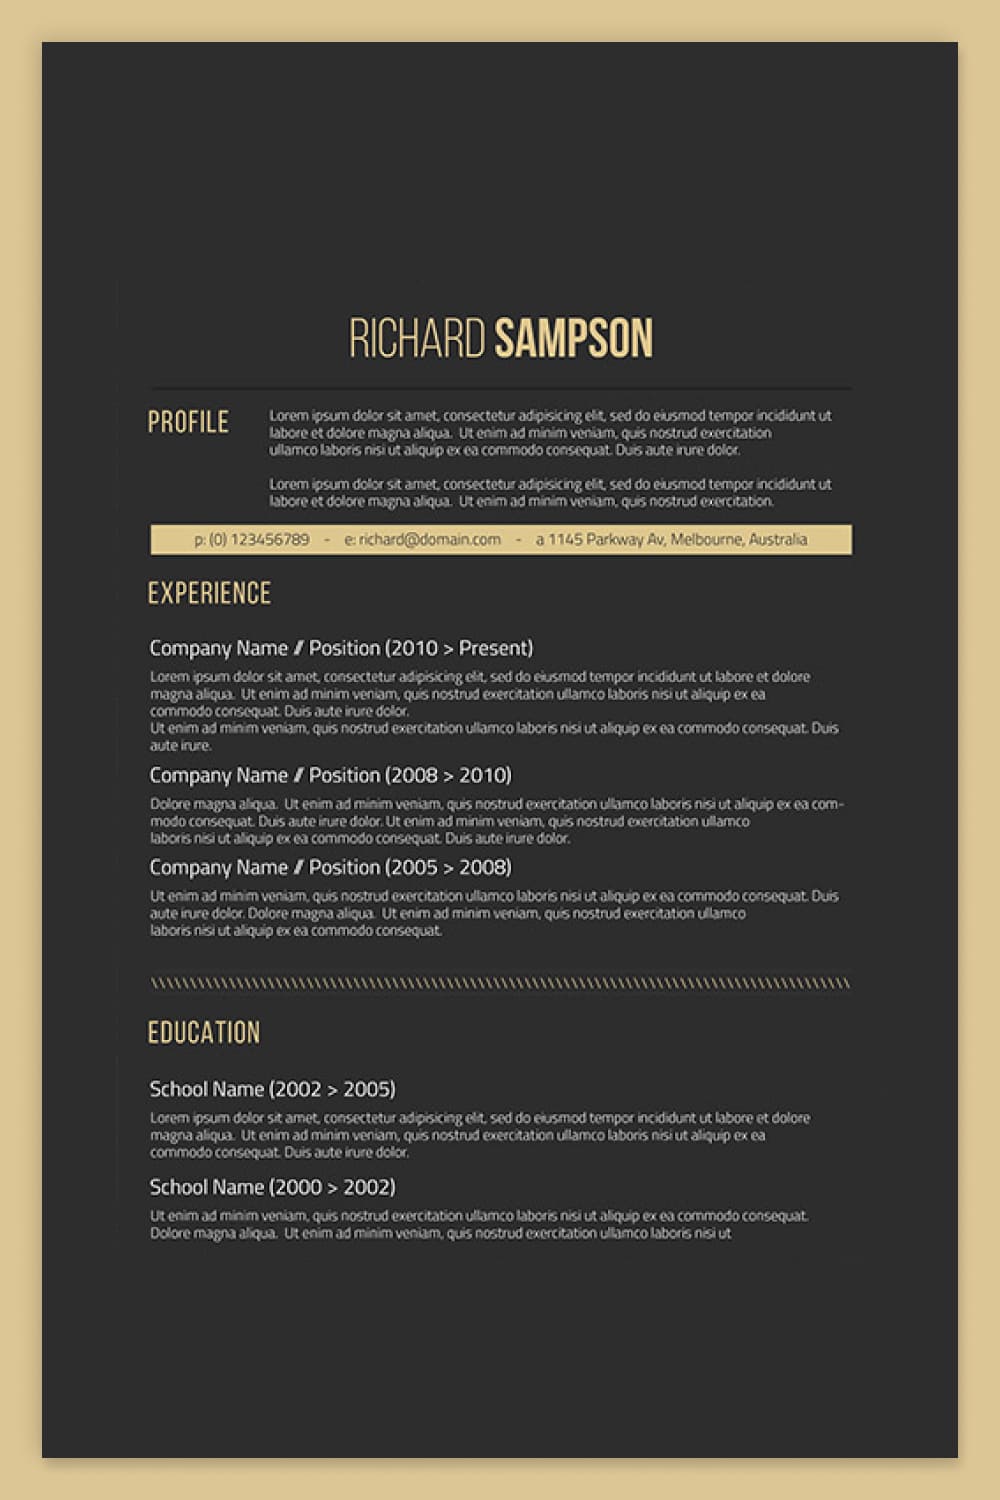 Resume with yellow and white text on black background.